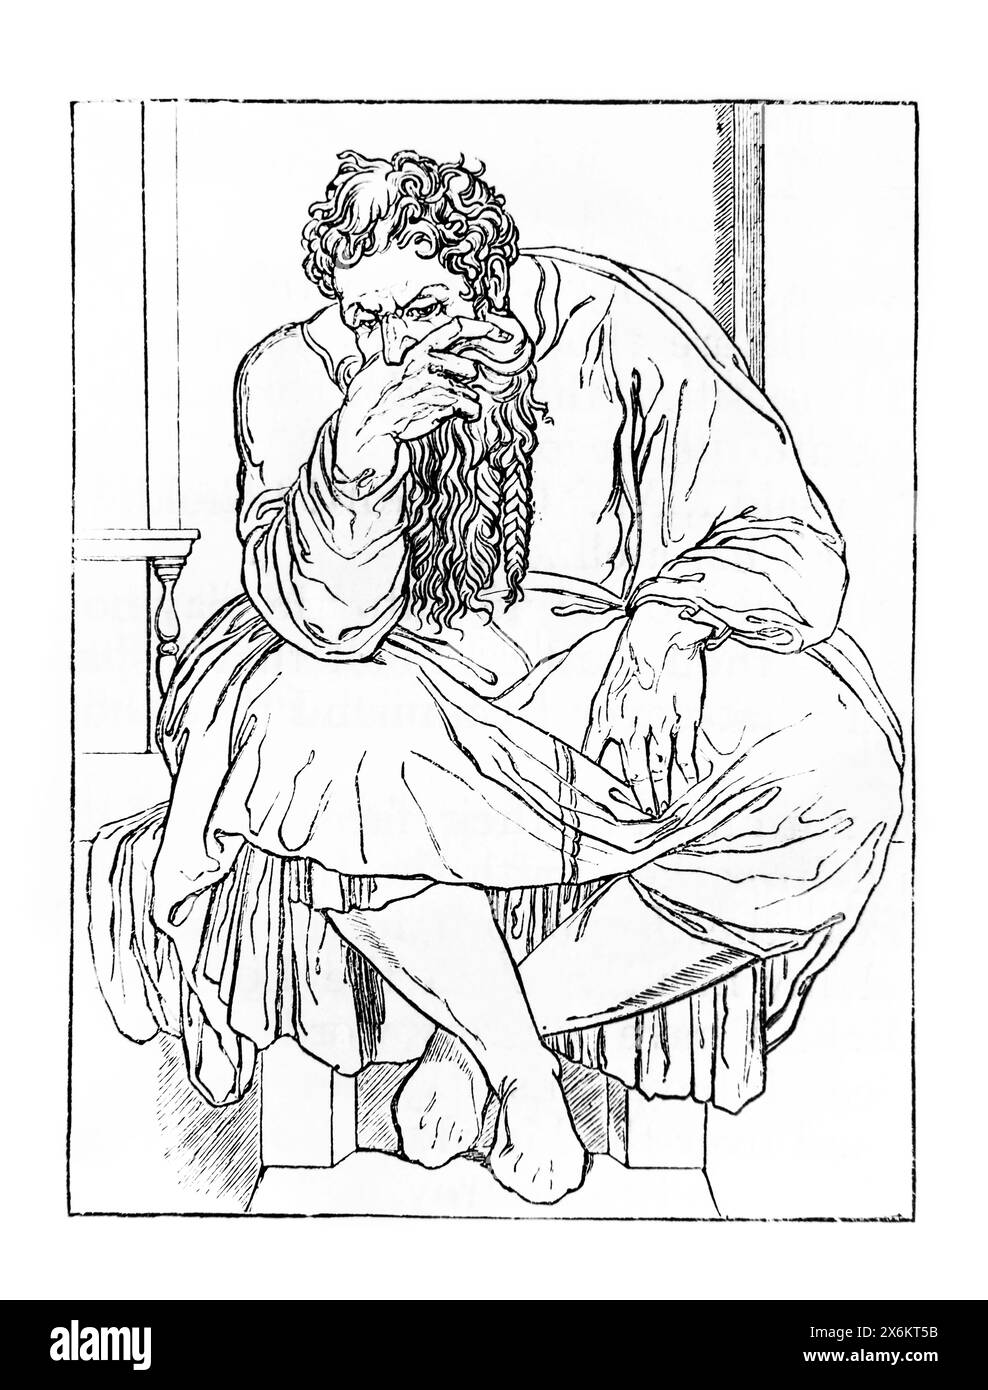 Wood Engraving of the Weeping Prophet Jeremiah Drawn from the Michelangelo's Sistine Chapel in Antique 19th century Illustrated Family bible Stock Photo